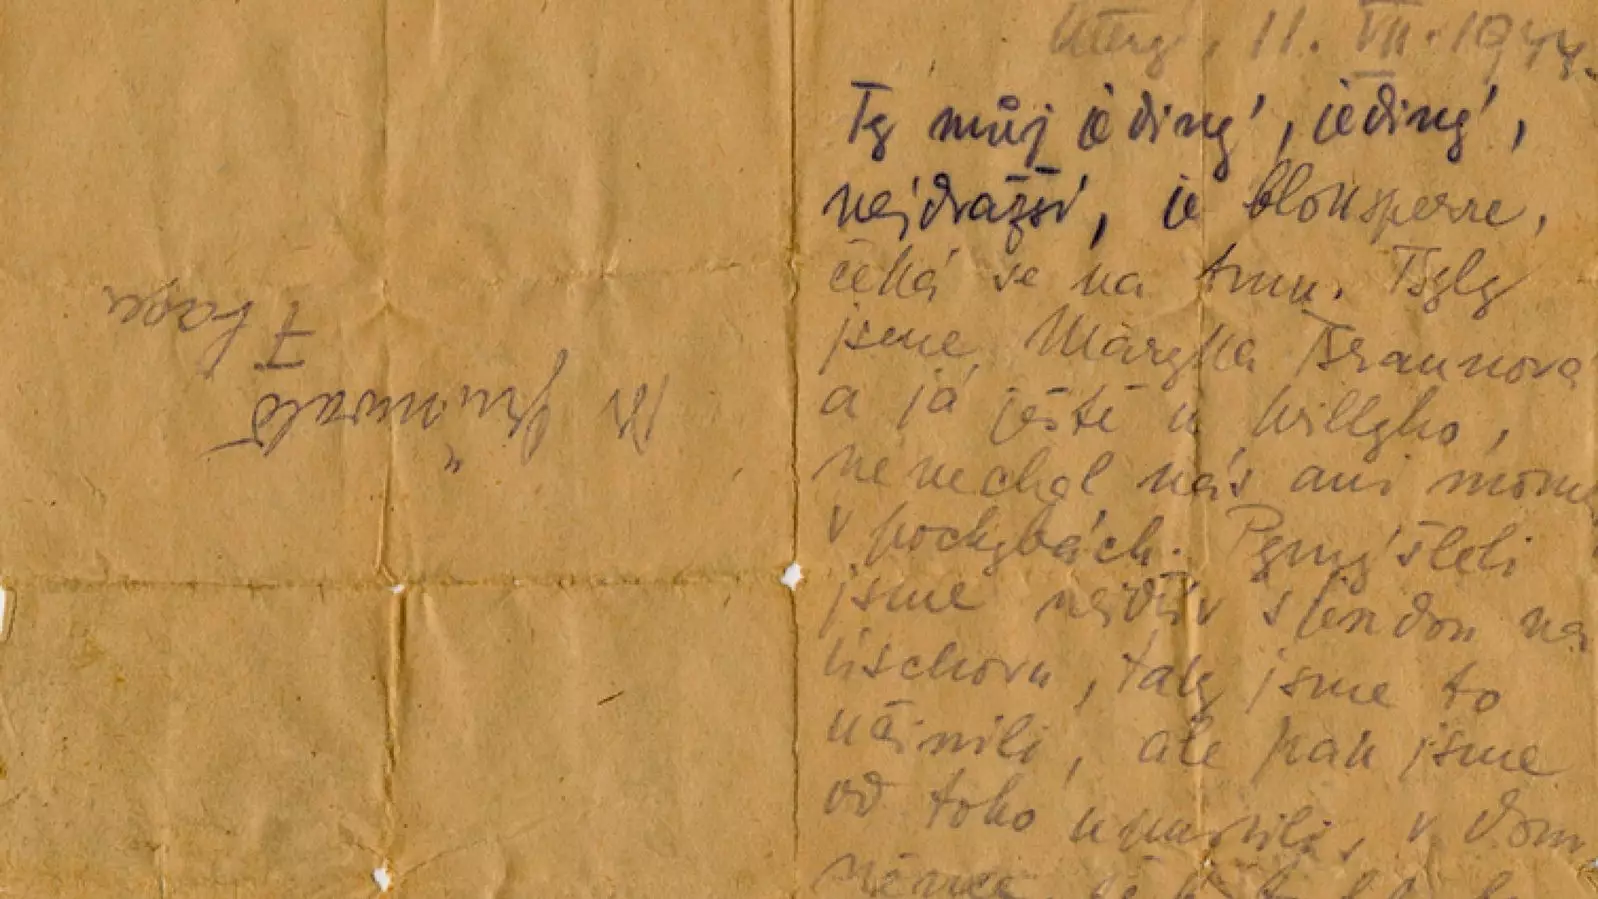 Son Shares Heart-Breaking Letter From His Mother Killed In The Holocaust